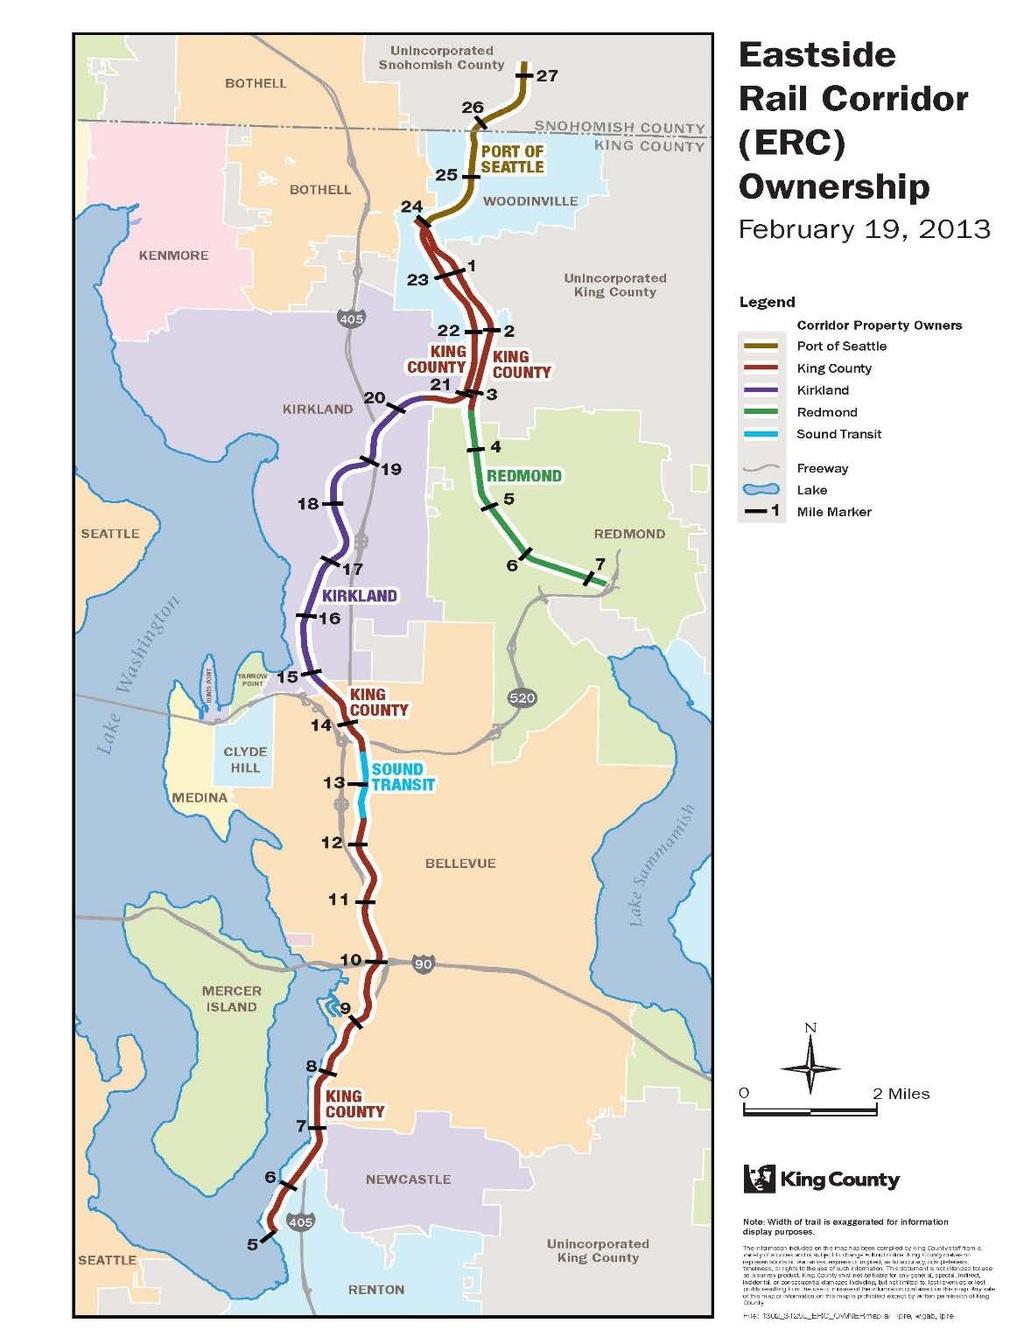 42 mile corridor purchased by Port of Seattle from BNSF in 2009 Now owned by: King County City of Kirkland City of